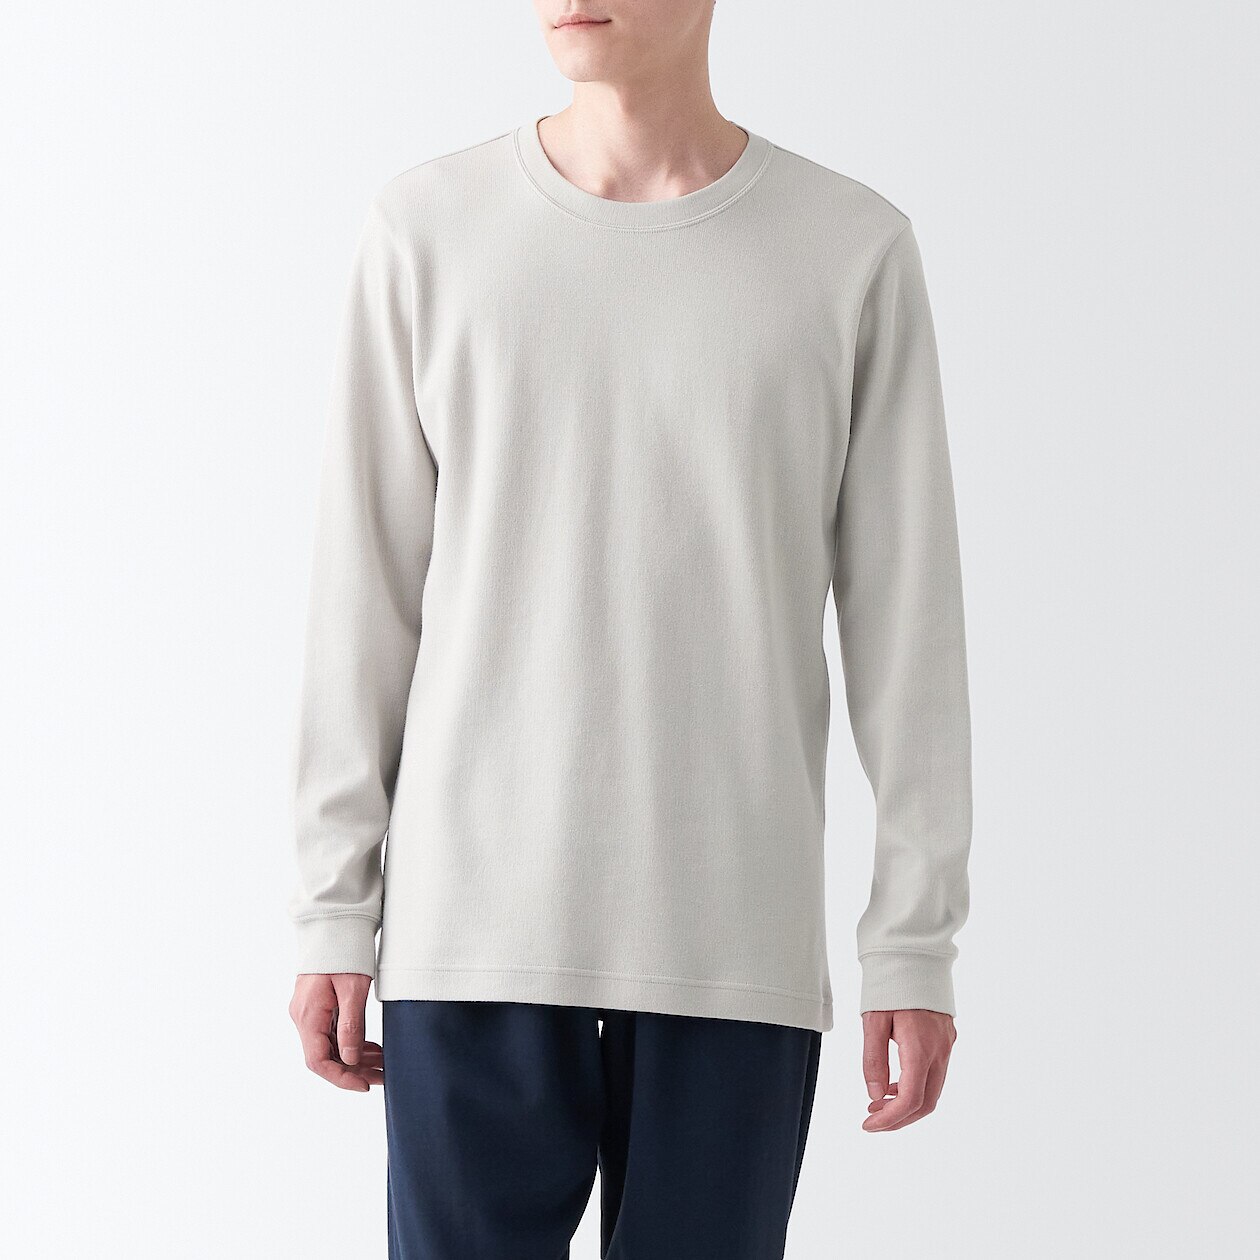 Men's Cotton and Wool Crew Neck Long Sleeve T-shirt